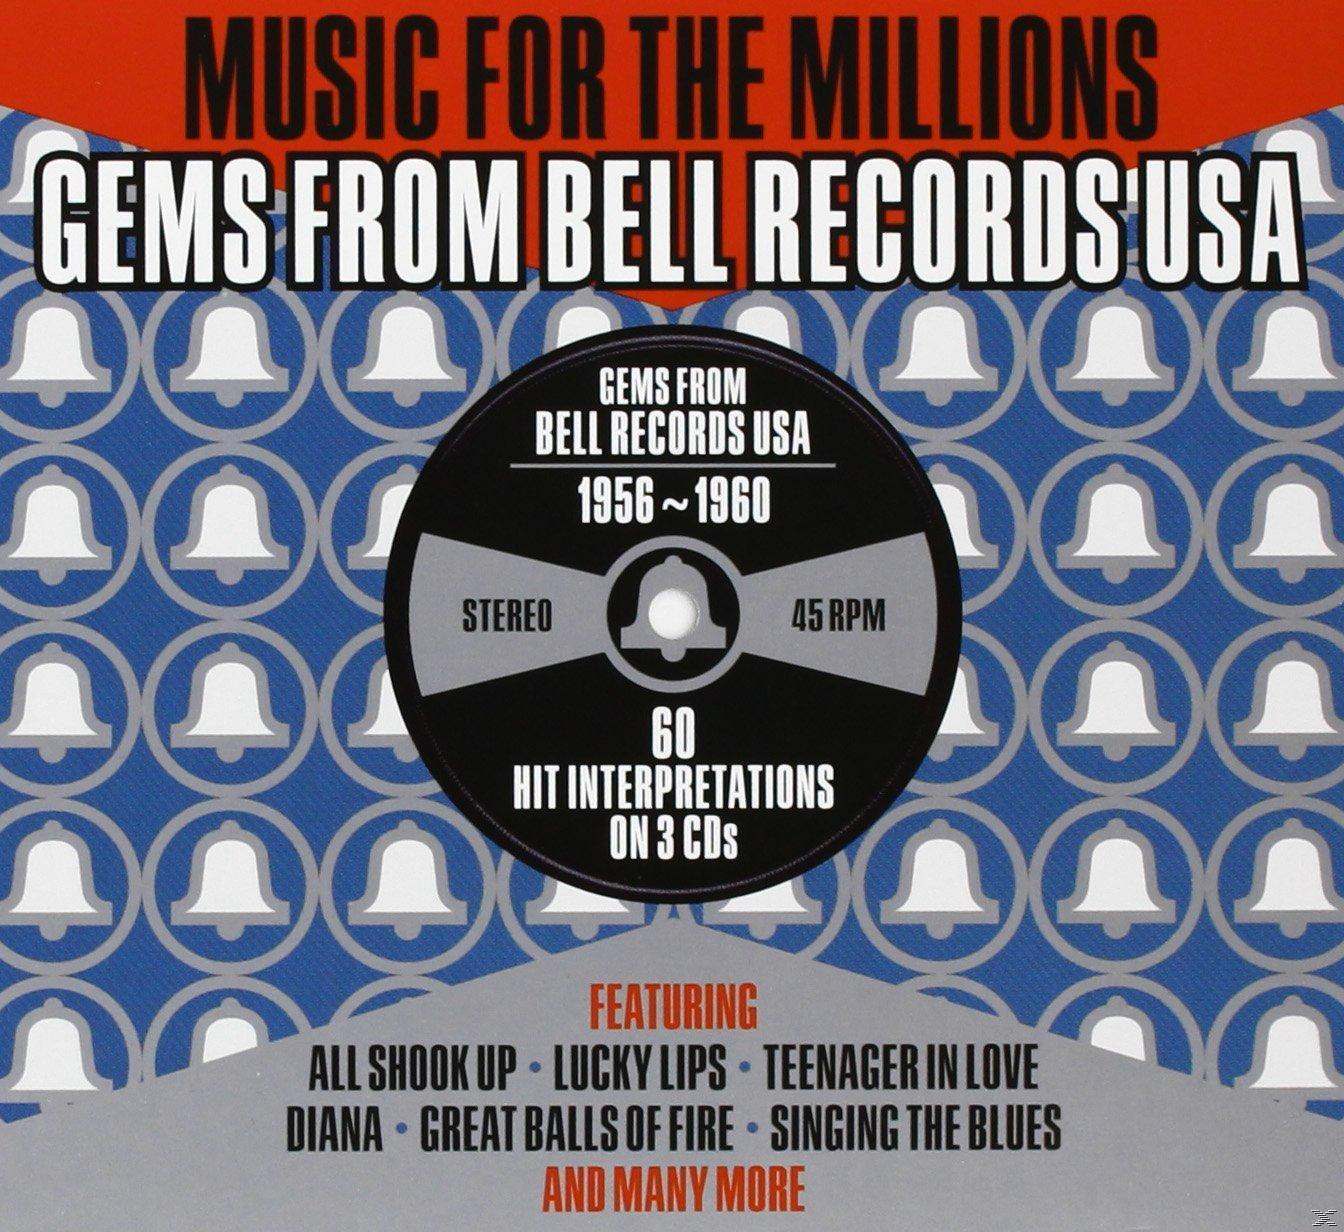 1956-60 - - Story The VARIOUS Rec.Usa Music Millions-Bell For (CD)